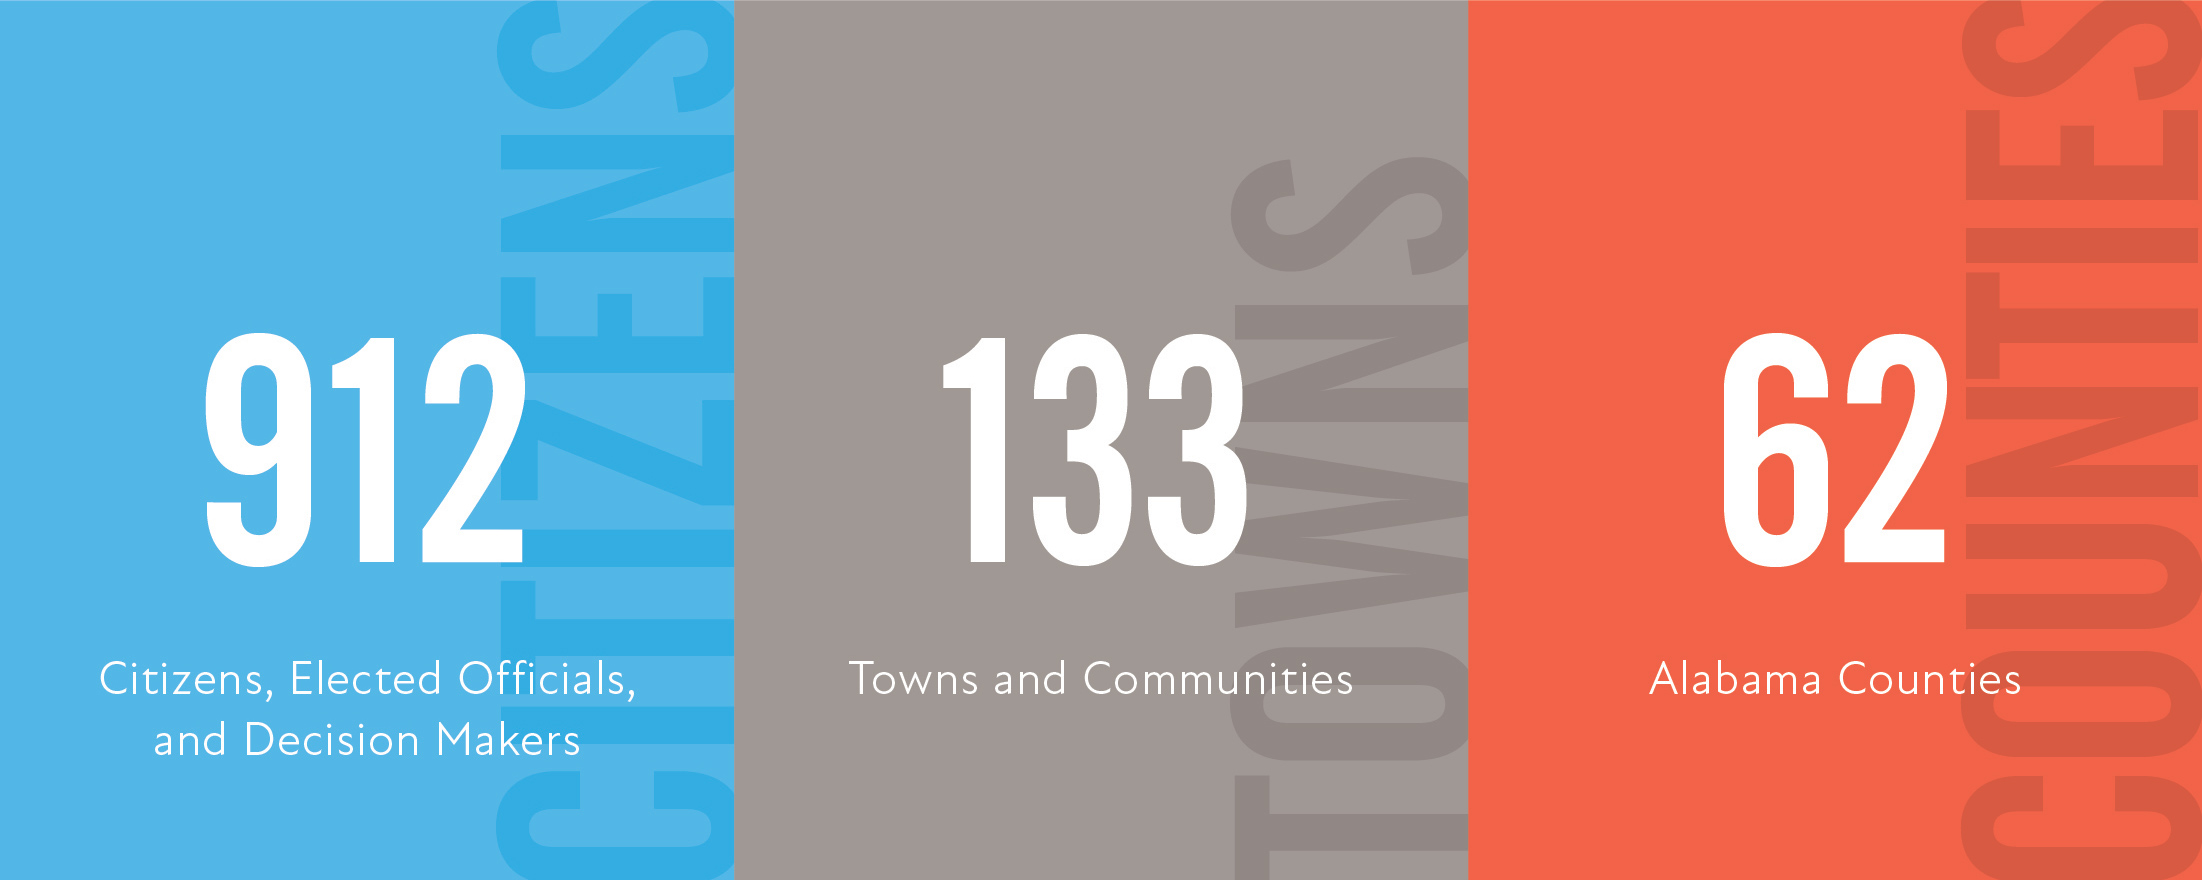 912 Citizens, Elected Officials, and Decision Makers; 133 Towns and Communities; 62 Alabama Counties